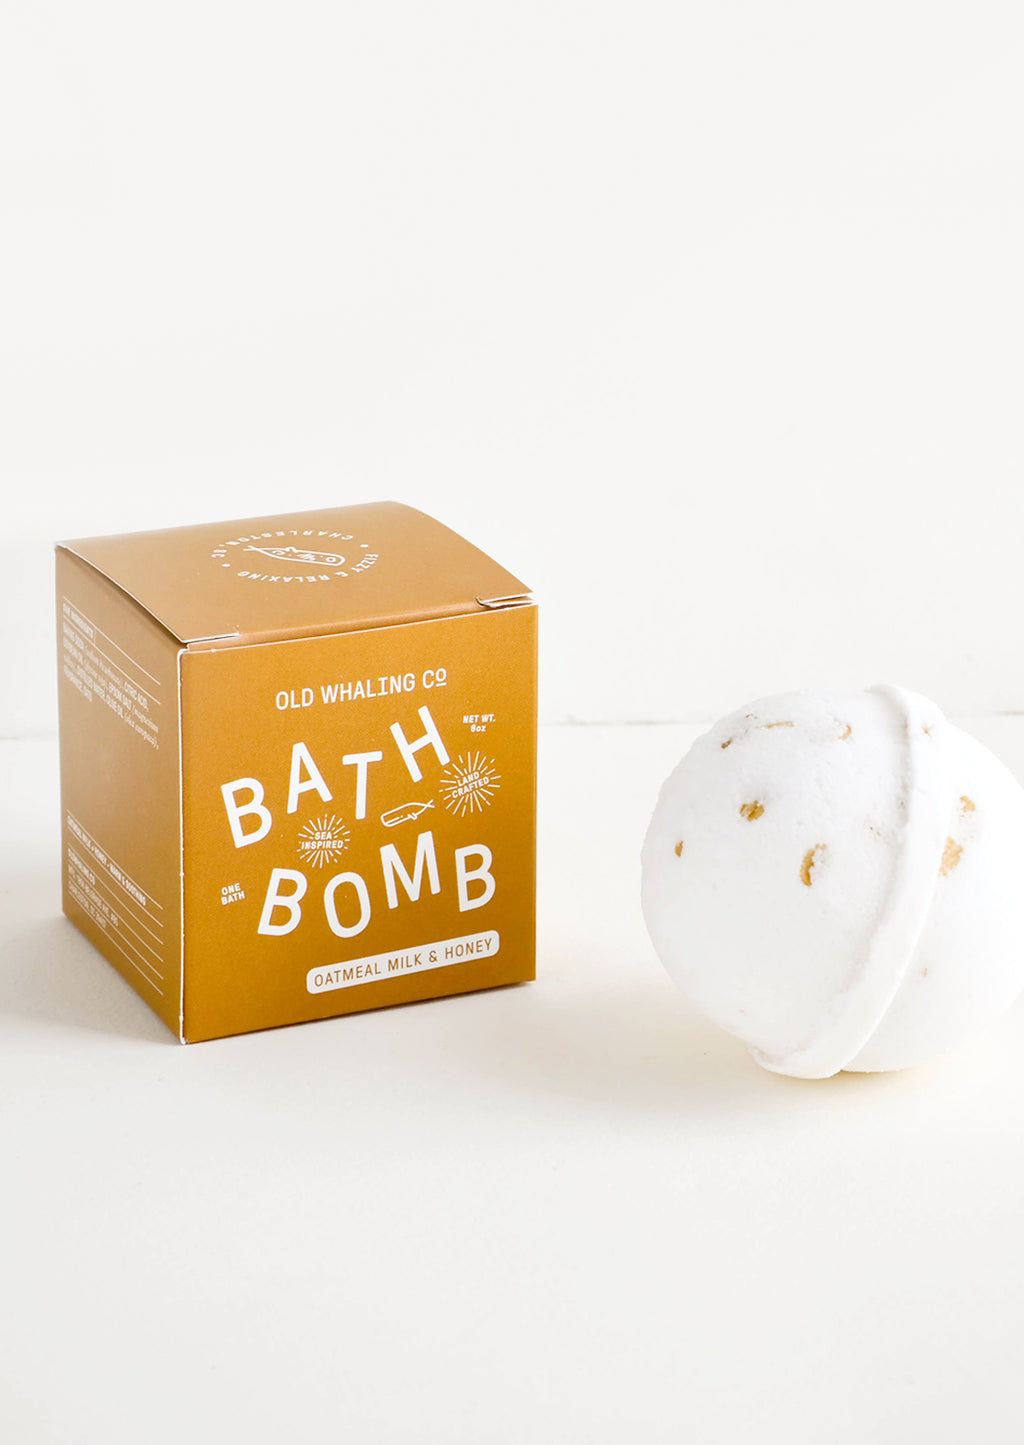 Oatmeal Milk & Honey: White colored, round bath bomb with brown box packaging